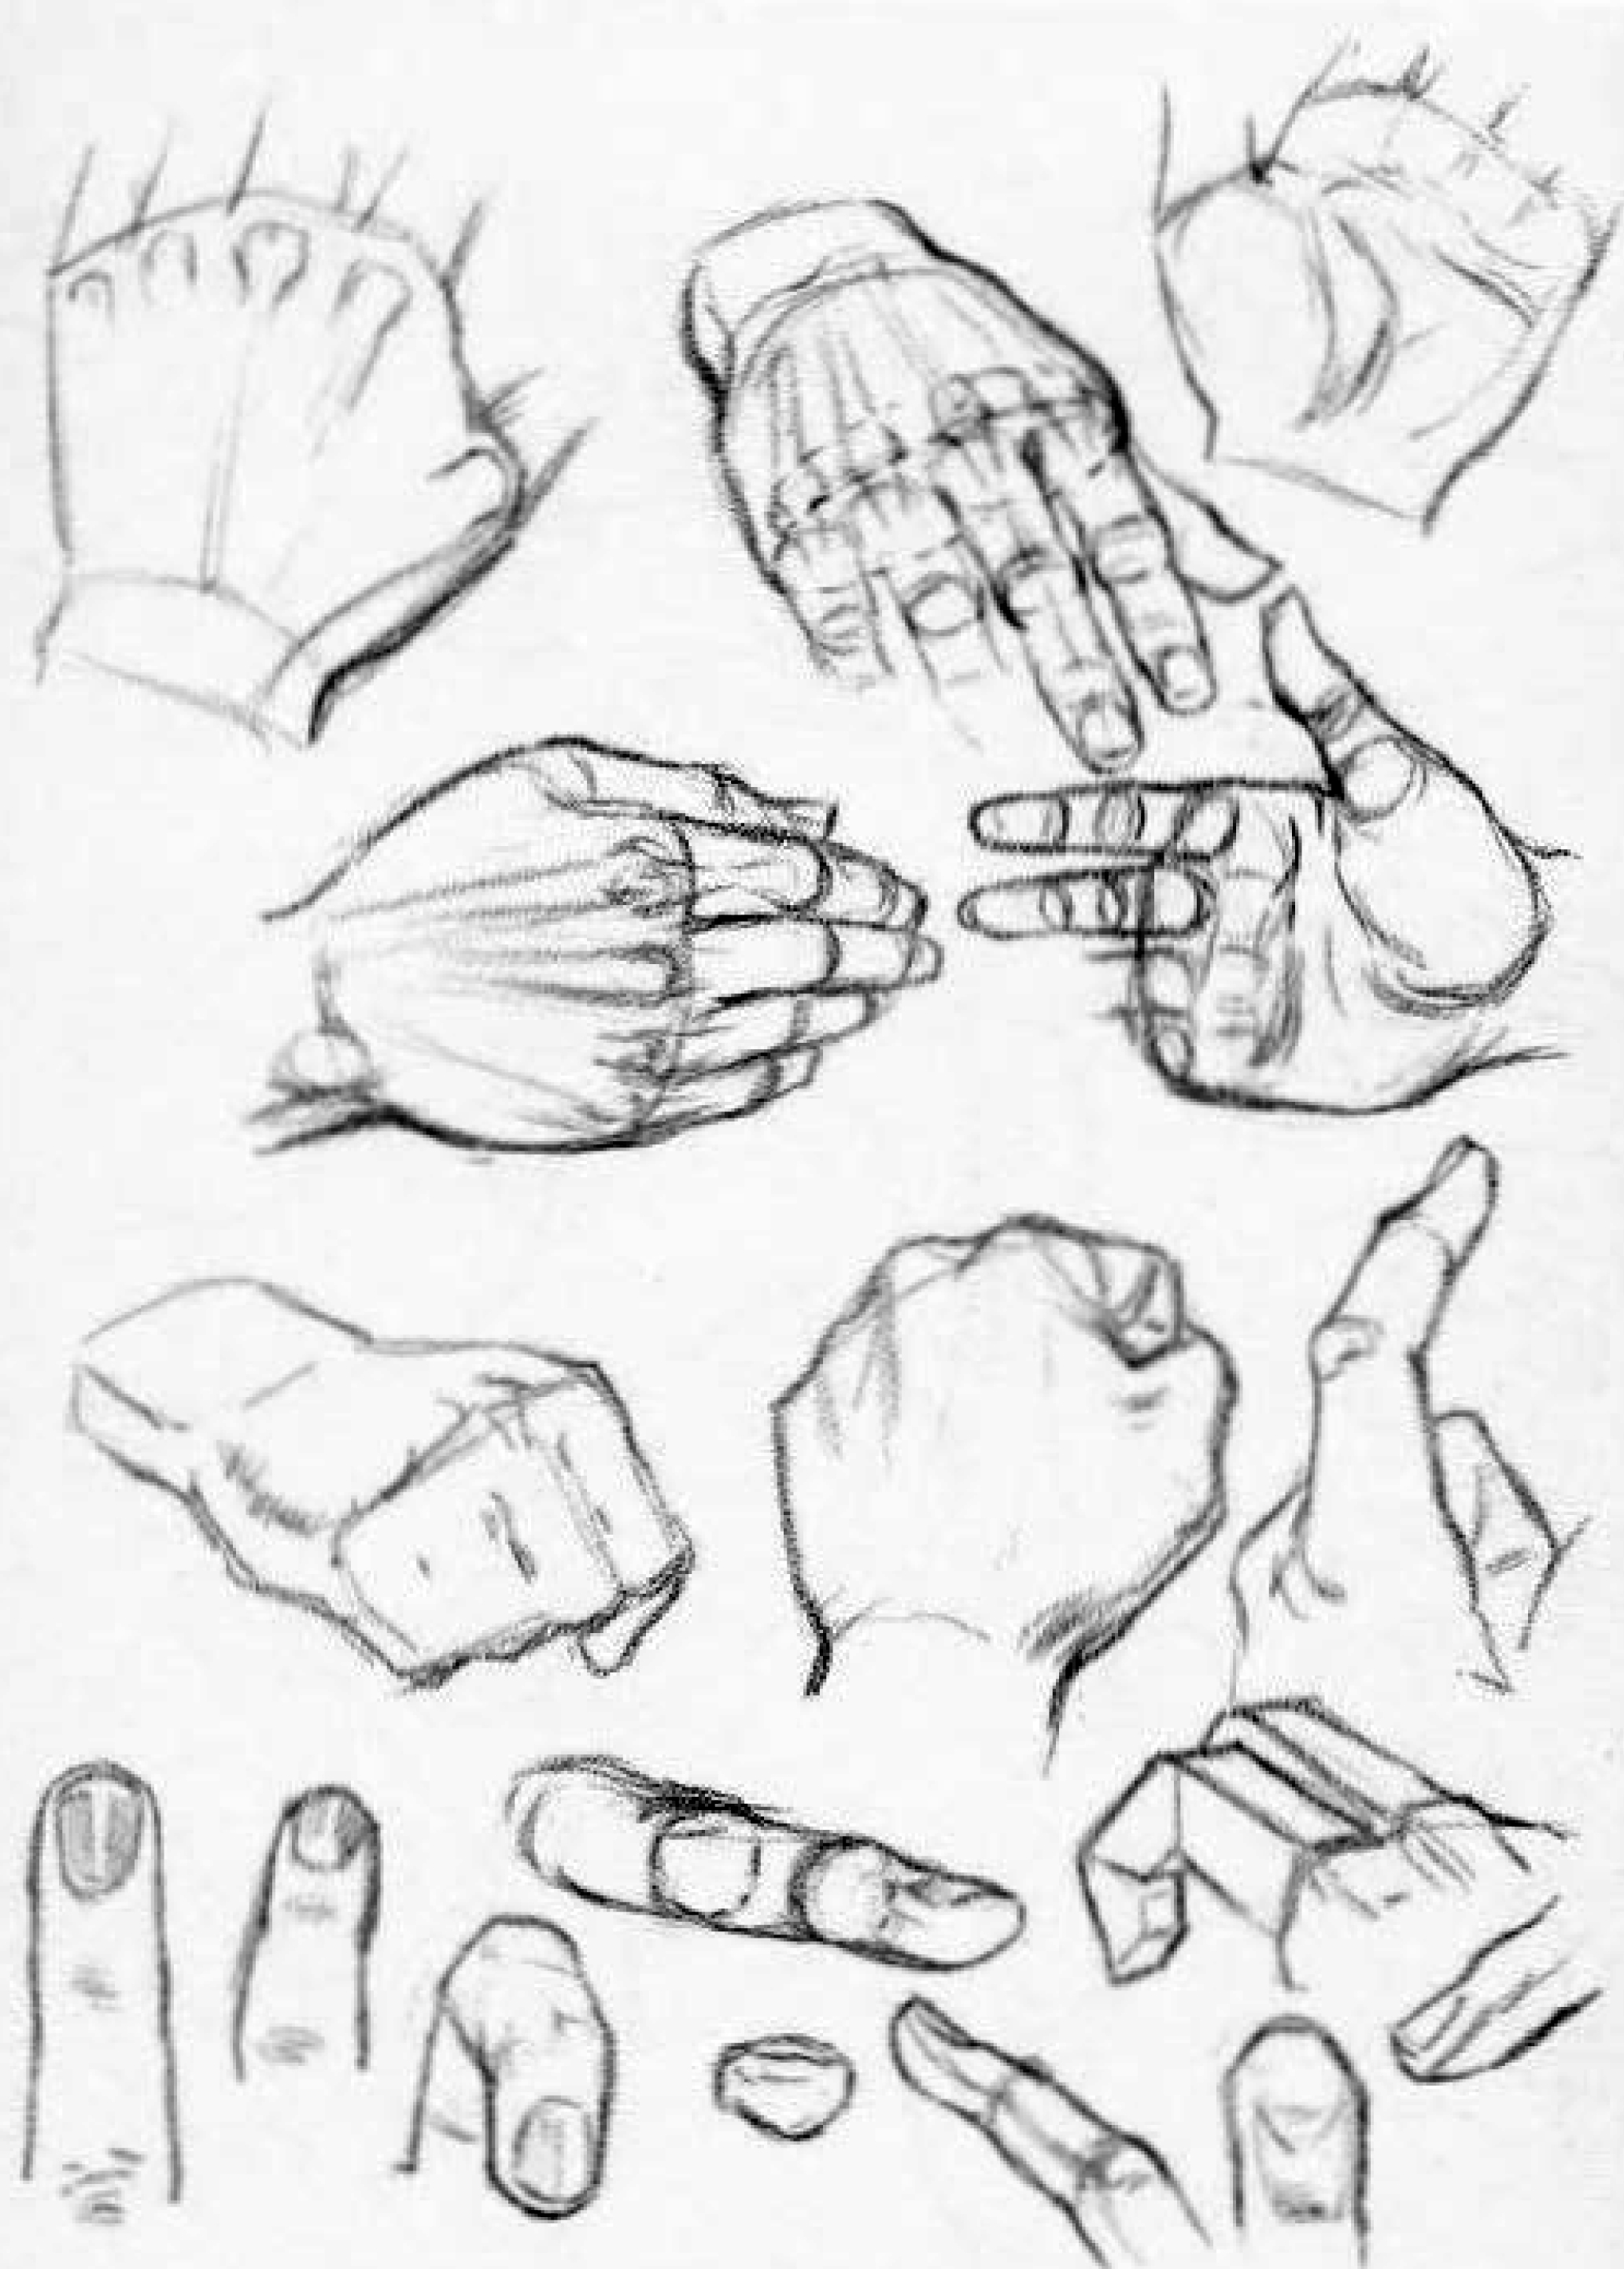  How To Draw Hands Sketching for Adult